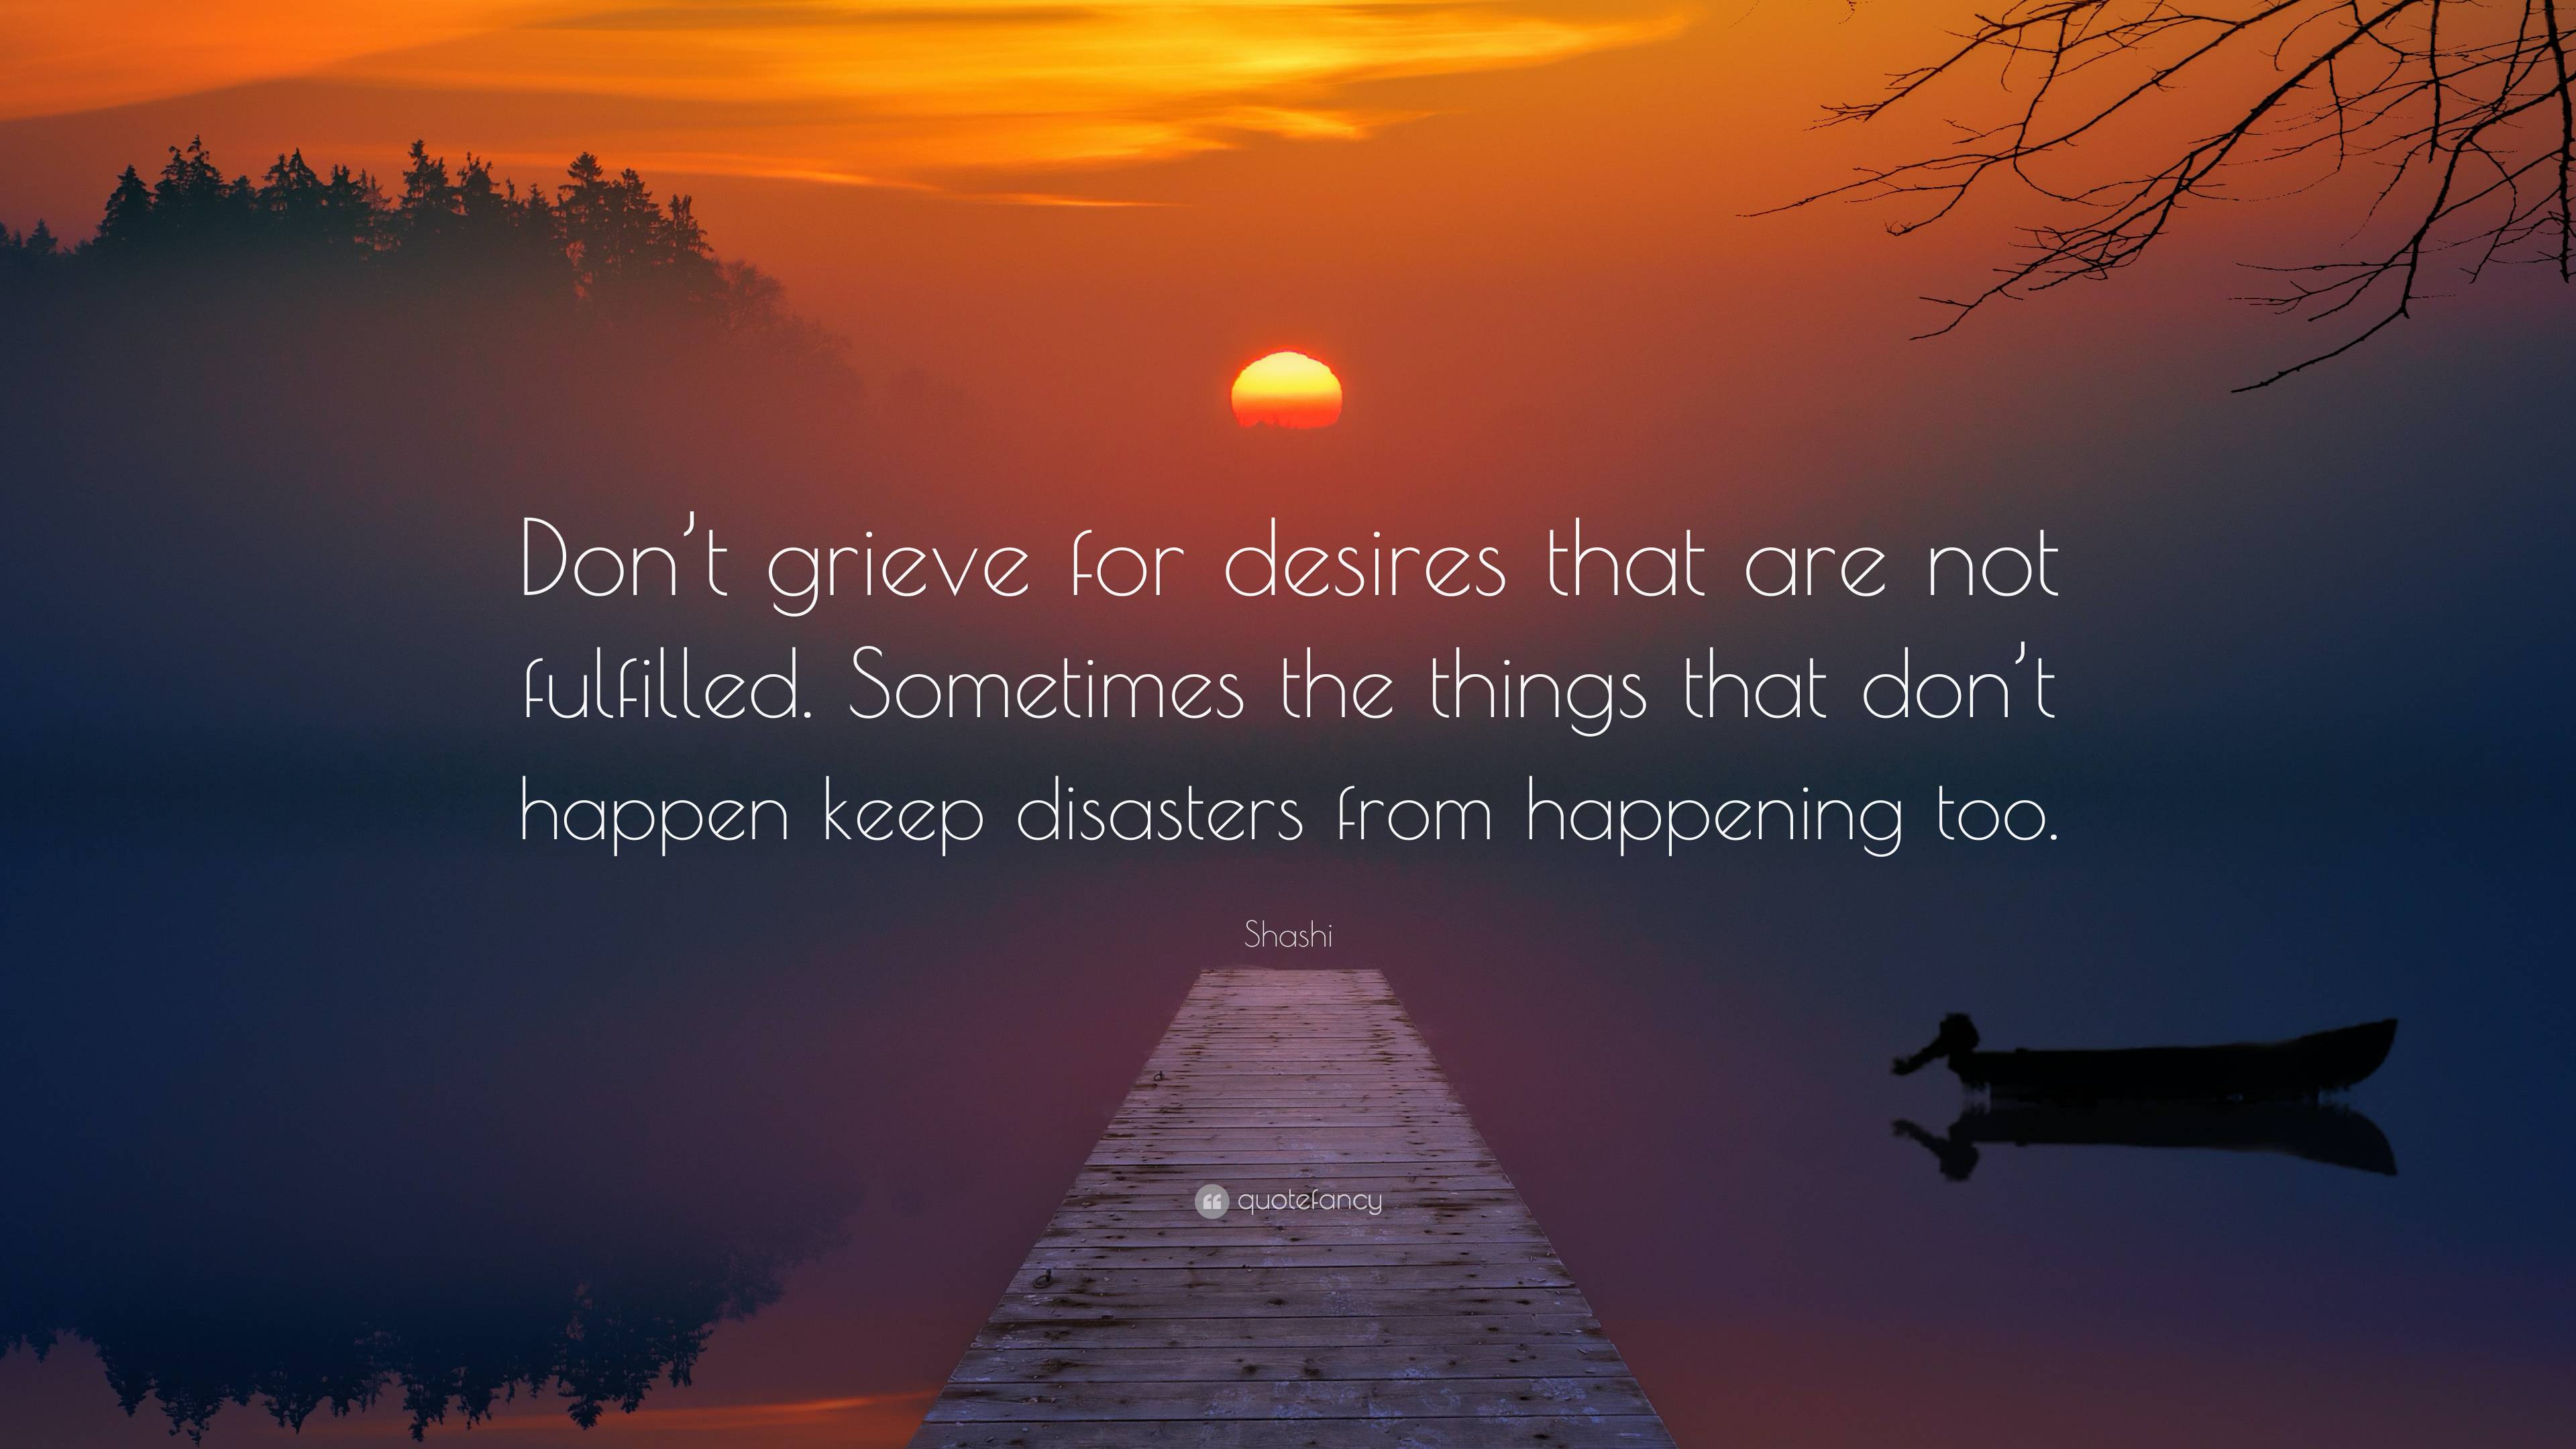 Shashi Quote: “Don’t grieve for desires that are not fulfilled ...